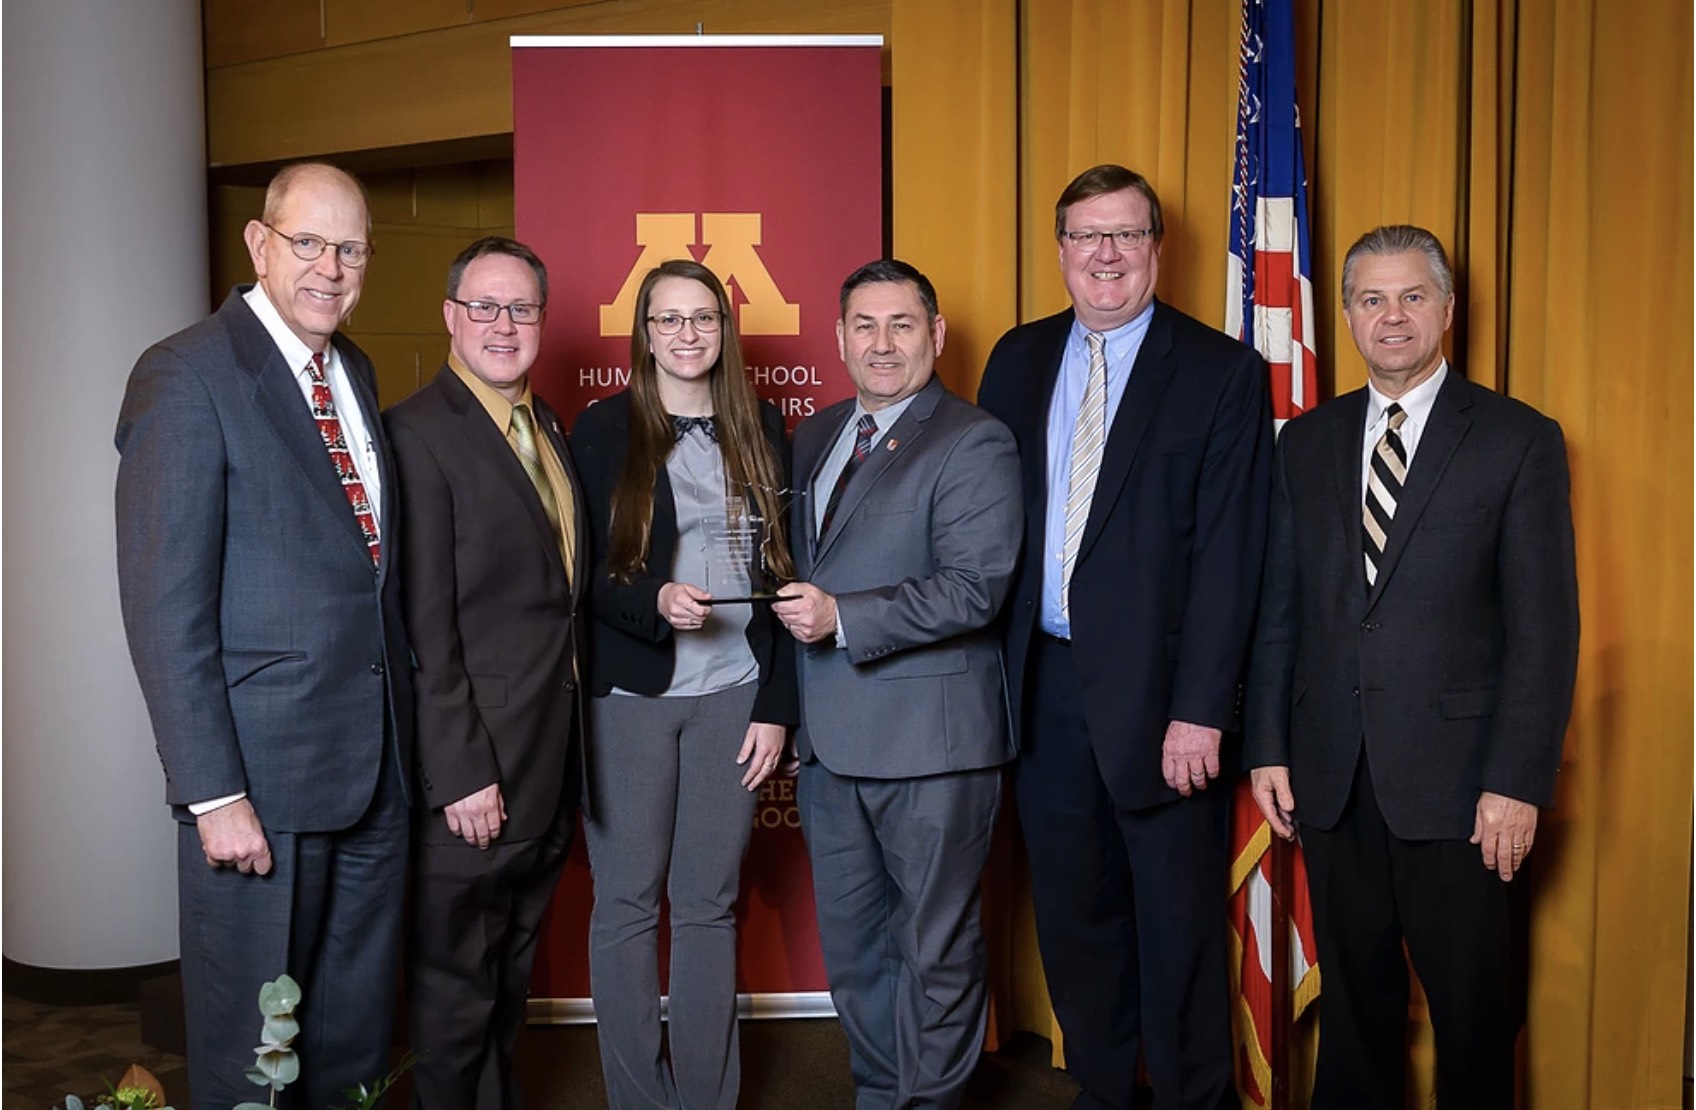 The Morris Model team accepts the 2017 MN Local Government Innovation Award for demonstrating outstanding leadership in improving city infrastructure, planning, and in the case of Morris, sustainability.